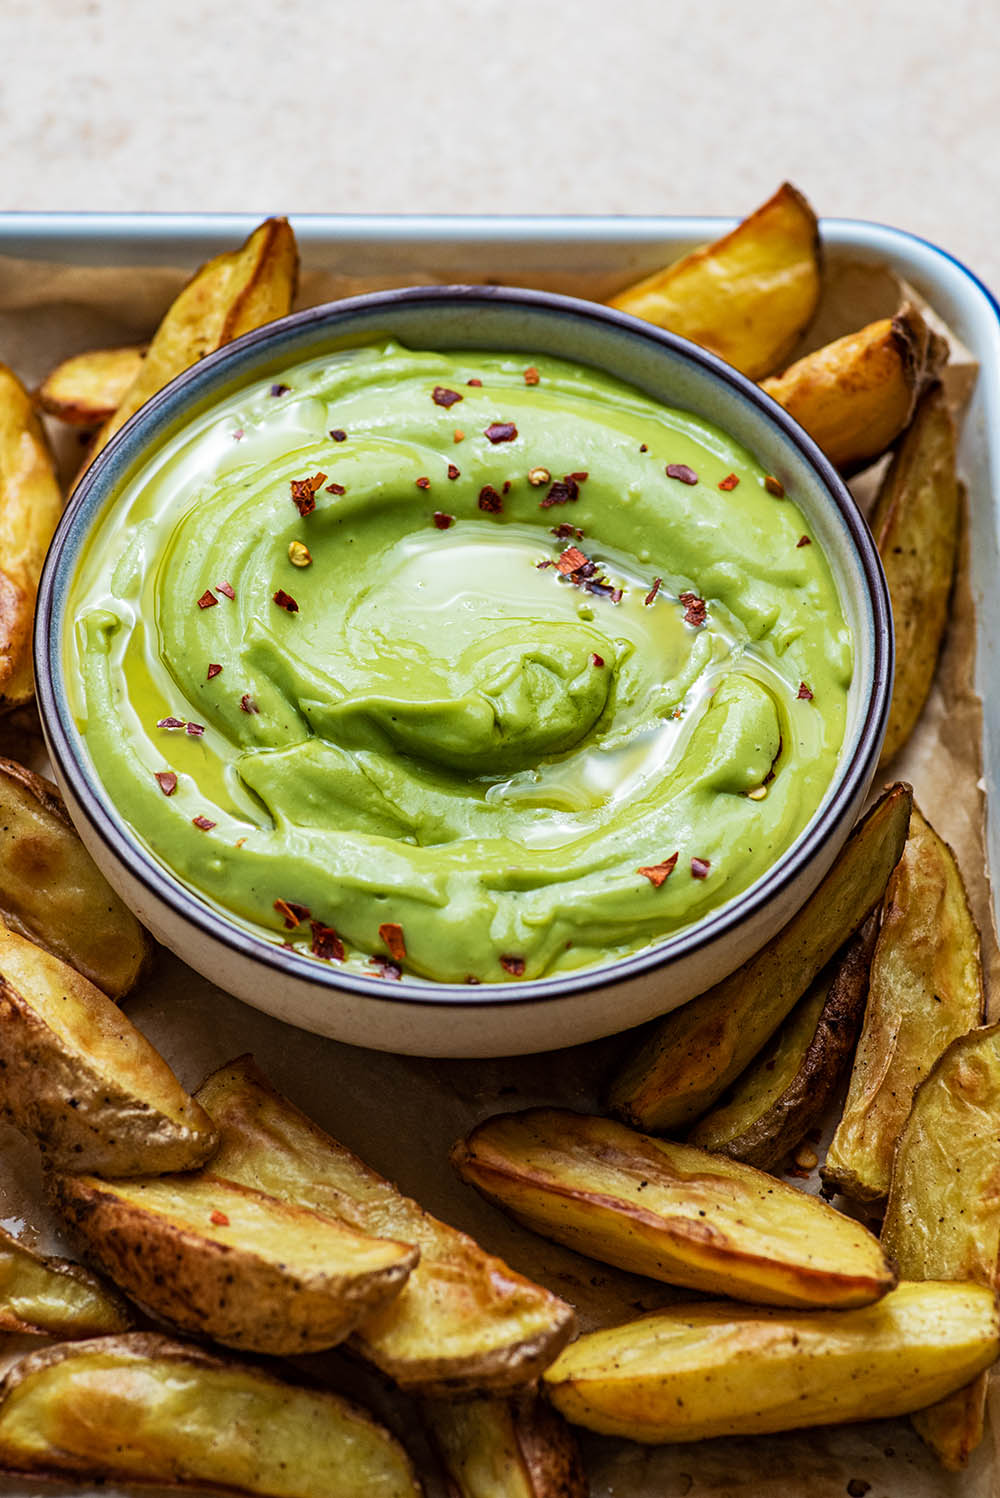 Aioli topped with hot pepper flakes, surrounded by wedges.